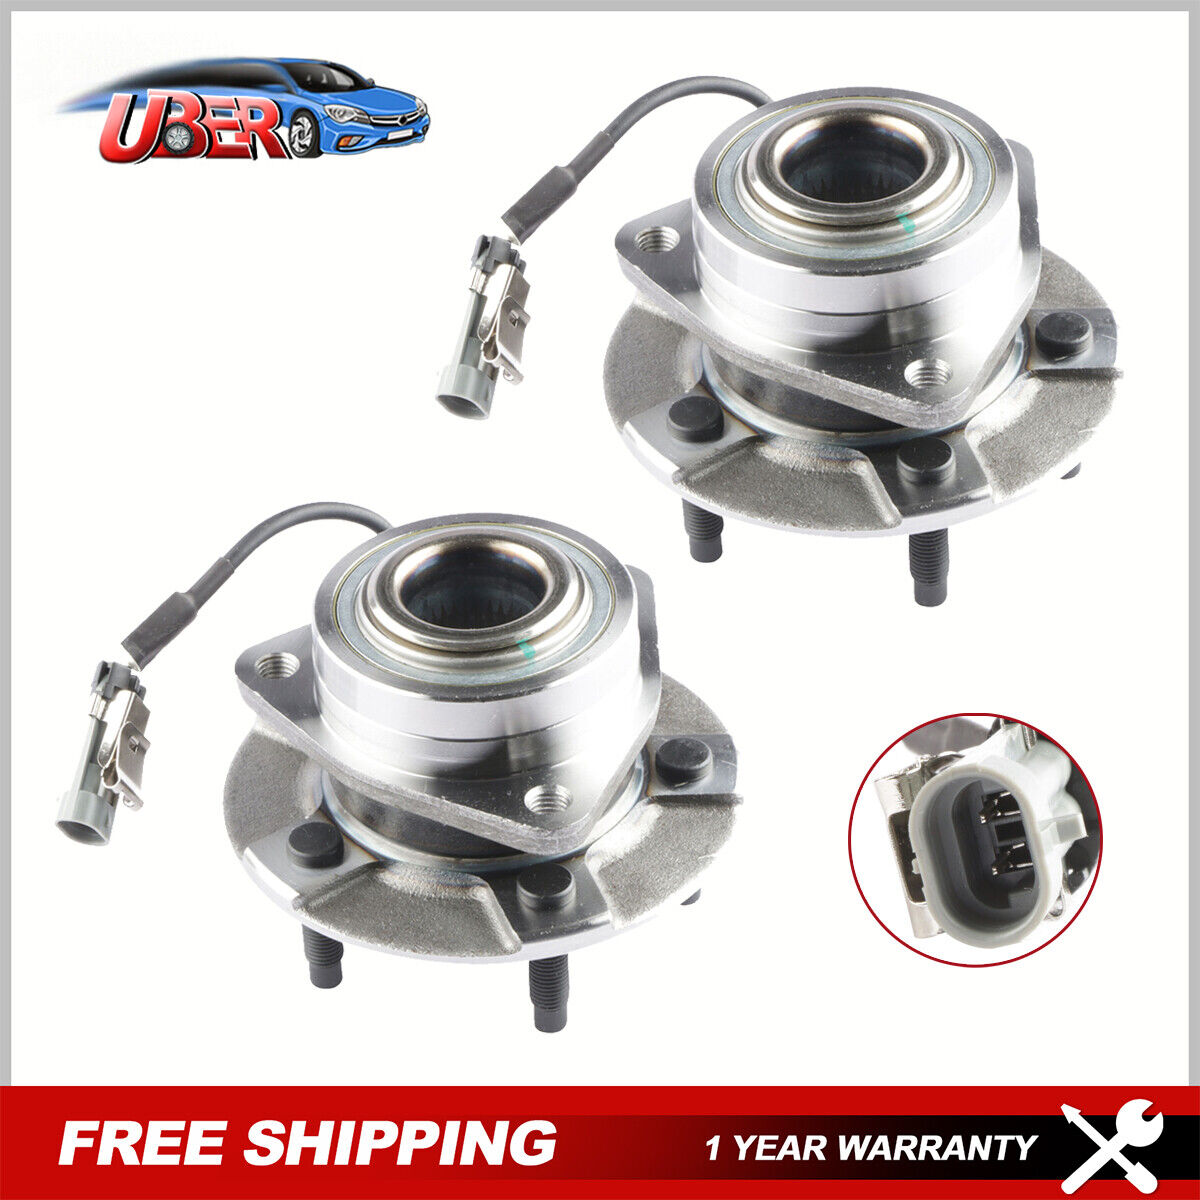 2x Front Wheel Hub Bearing W/ ABS For Chevy Equinox Saturn Vue Pontiac Torrent